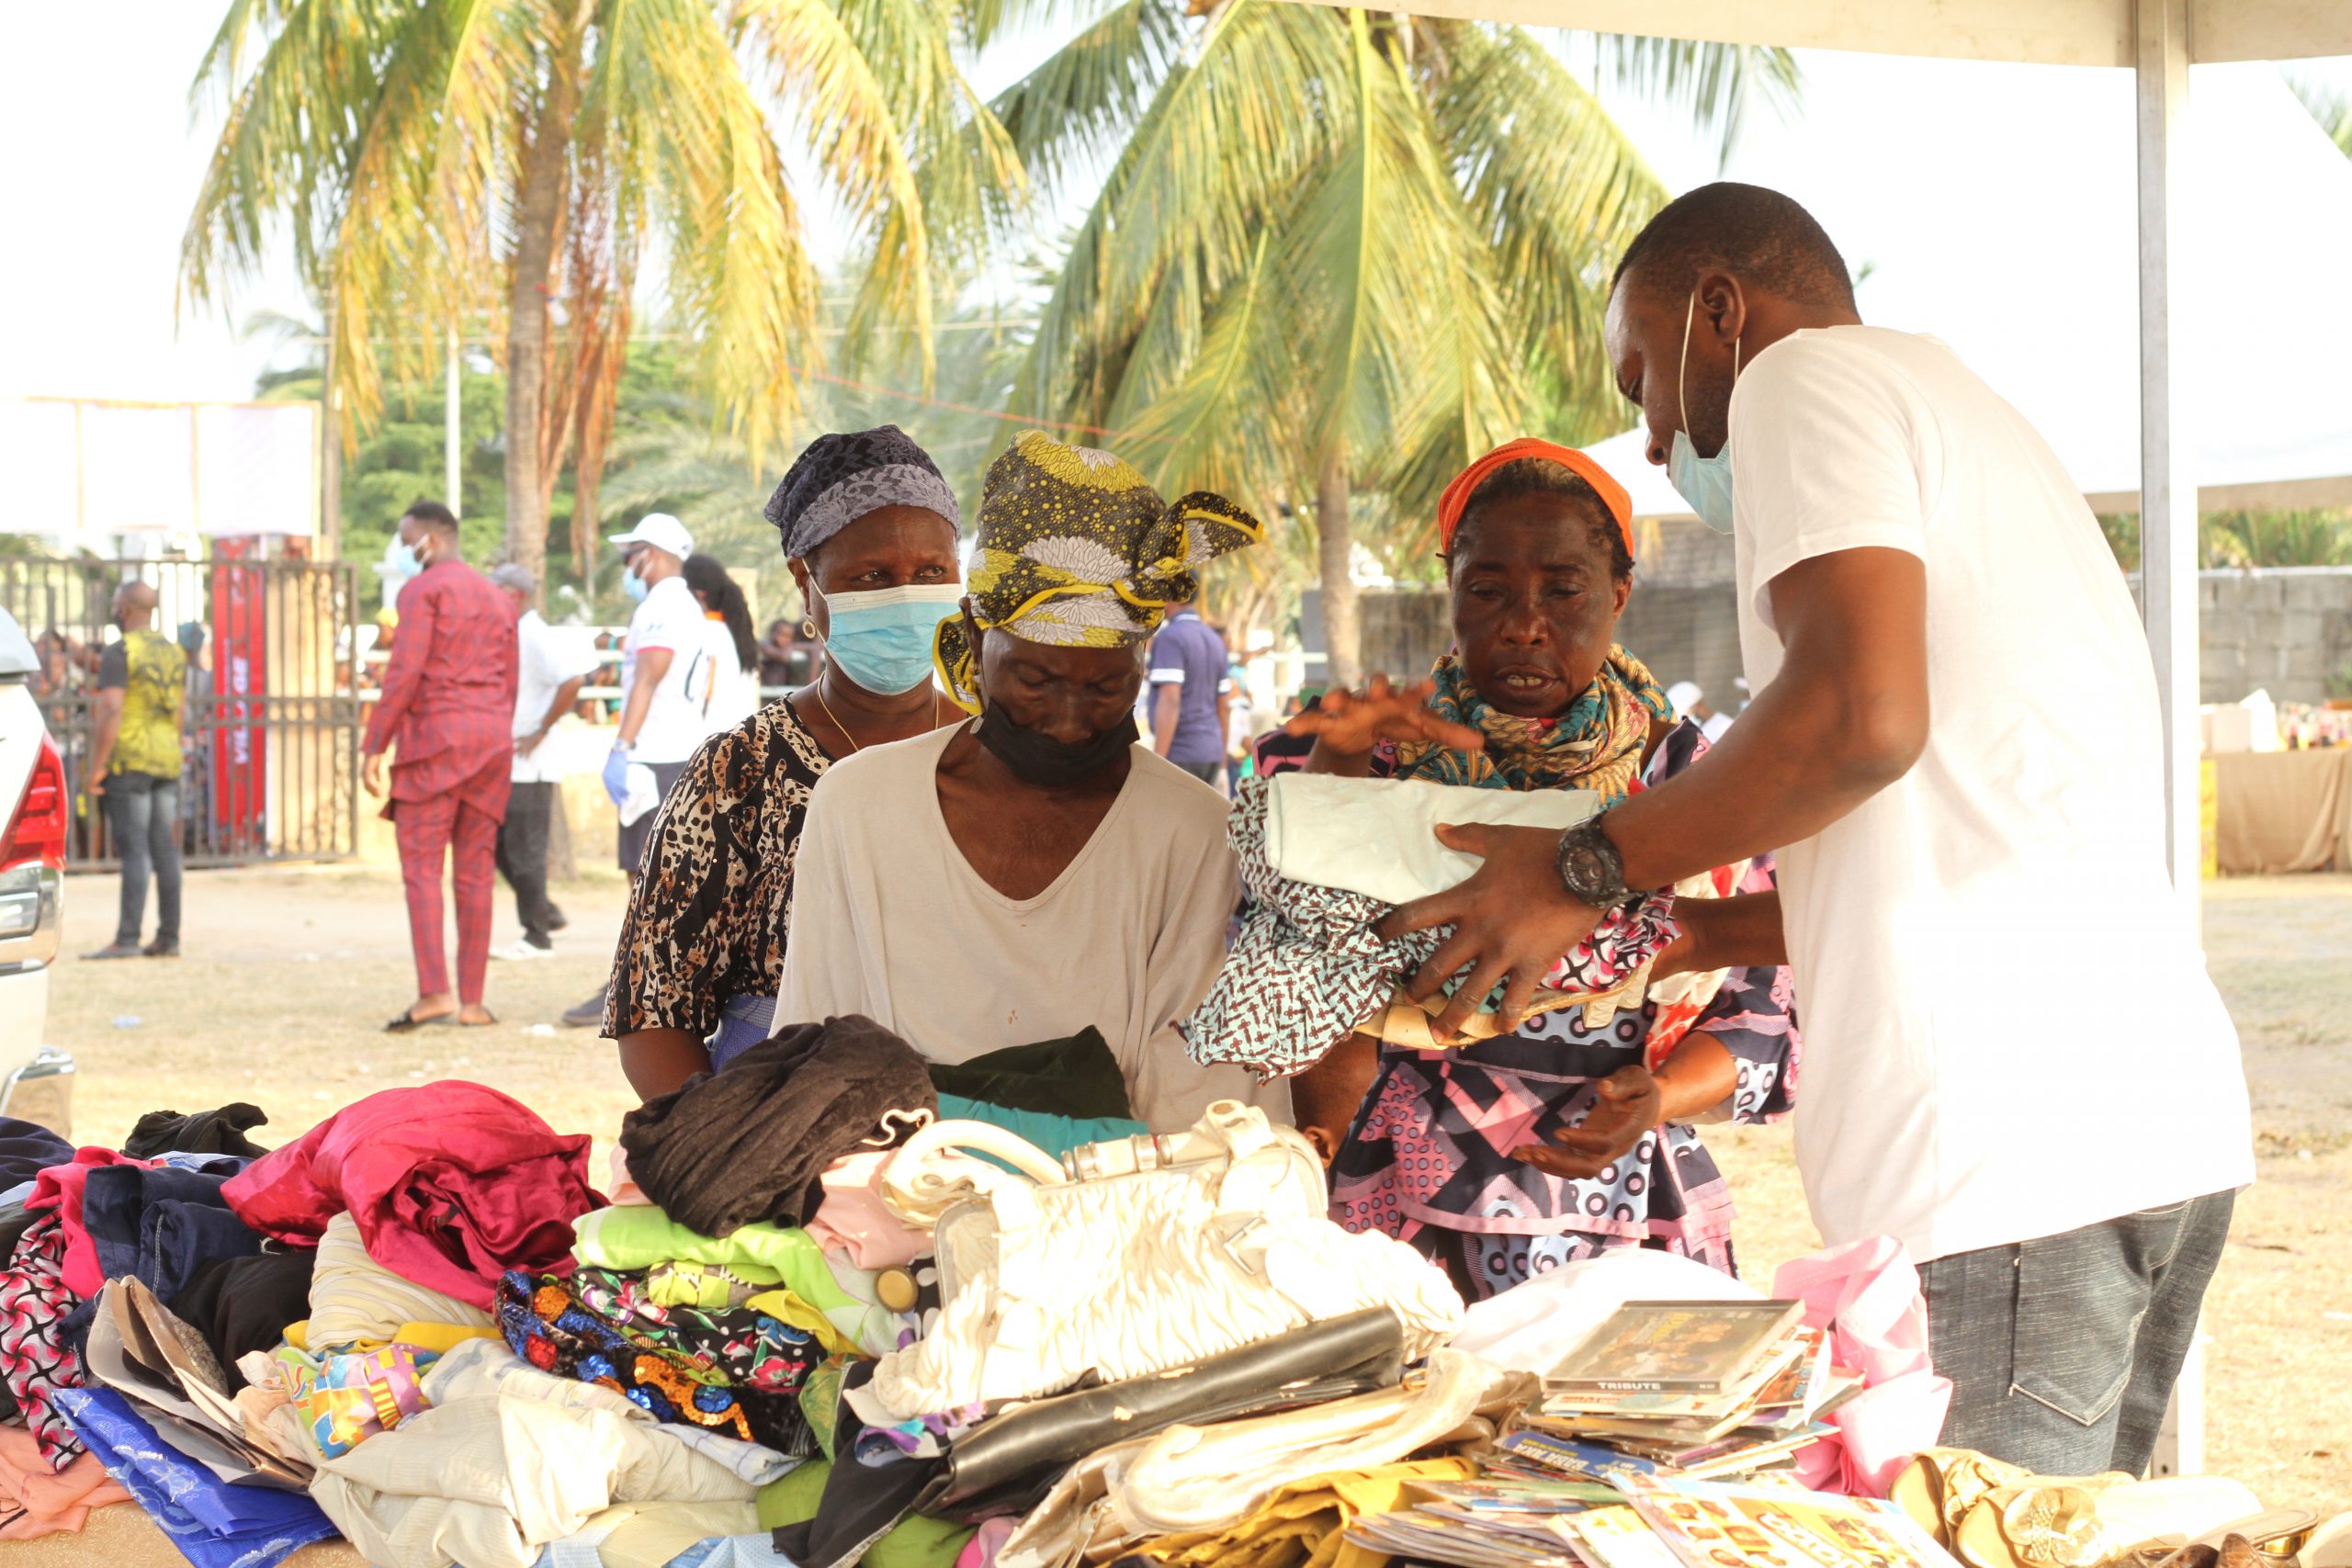 Trinitas Foundation initiates The Christmas Cheer with the goal of empowering 1,000 families with N10,000 cash and groceries for Christmas coupled with 500 kids’ school shoes and clothing for the elderly.